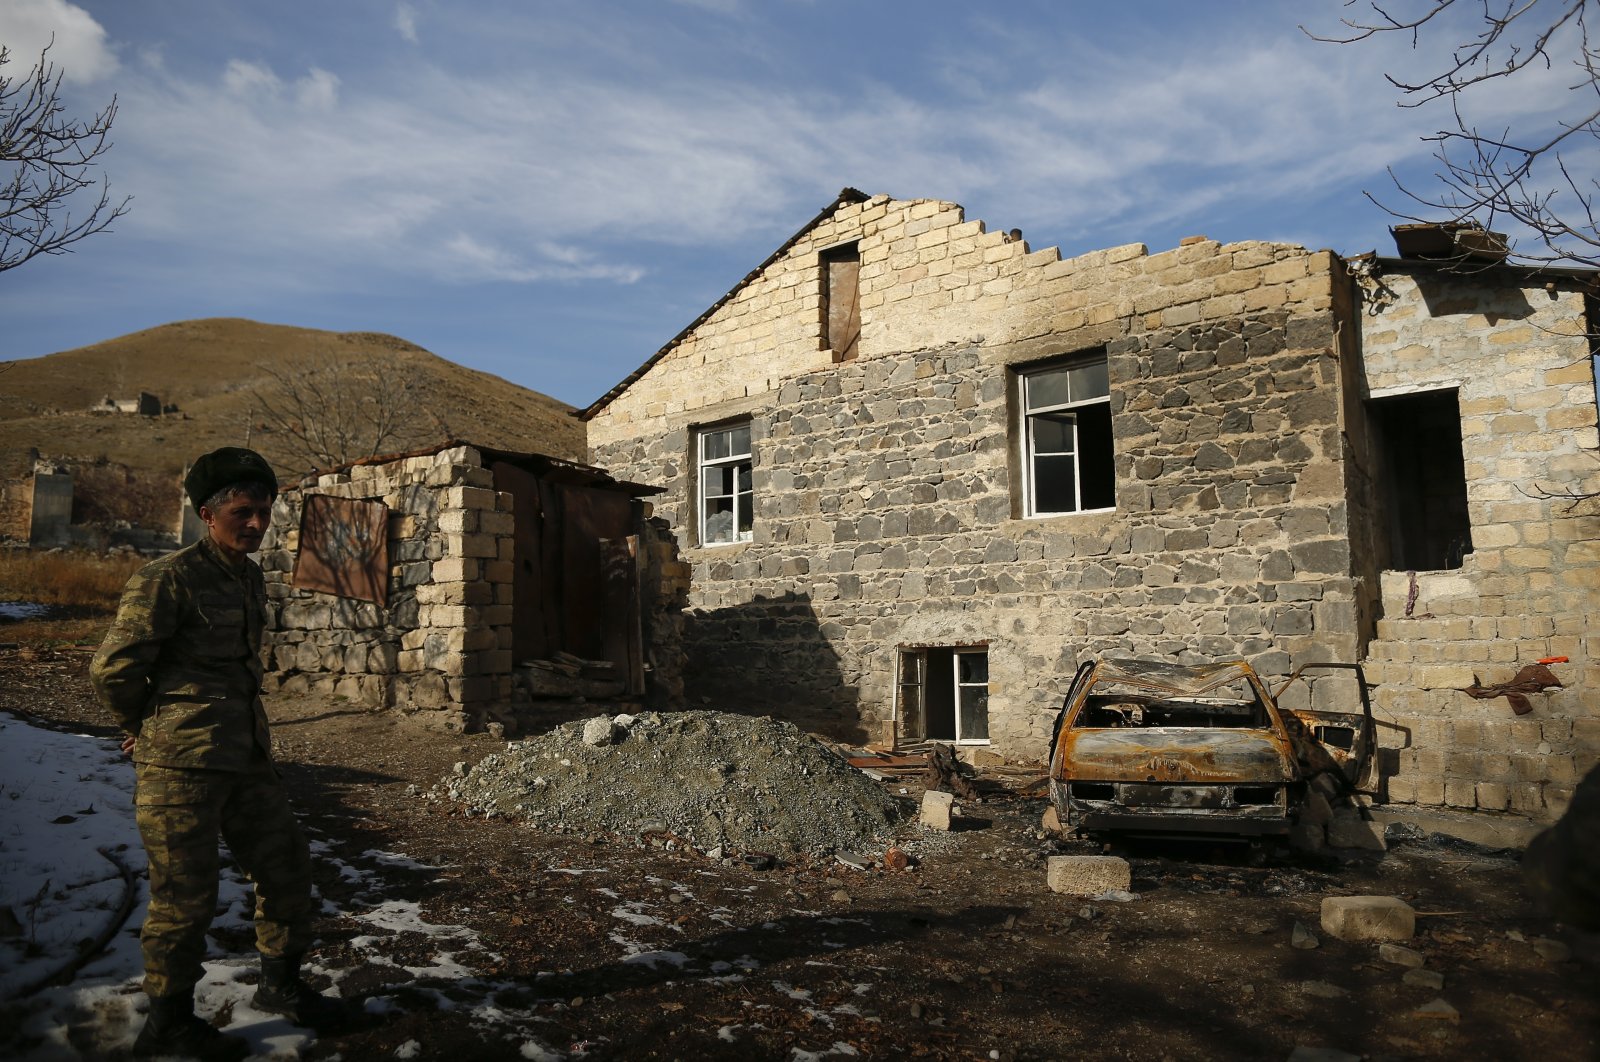 An Azerbaijani soldier stands near a destroyed house after the transfer of the Kalbajar region to Azerbaijani control, as part of a peace deal requiring Armenia to cede Azerbaijani territories they illegally occupied outside Nagorno-Karabakh, Kalbajar, Azerbaijan, Dec. 2, 2020. (AP File Photo)